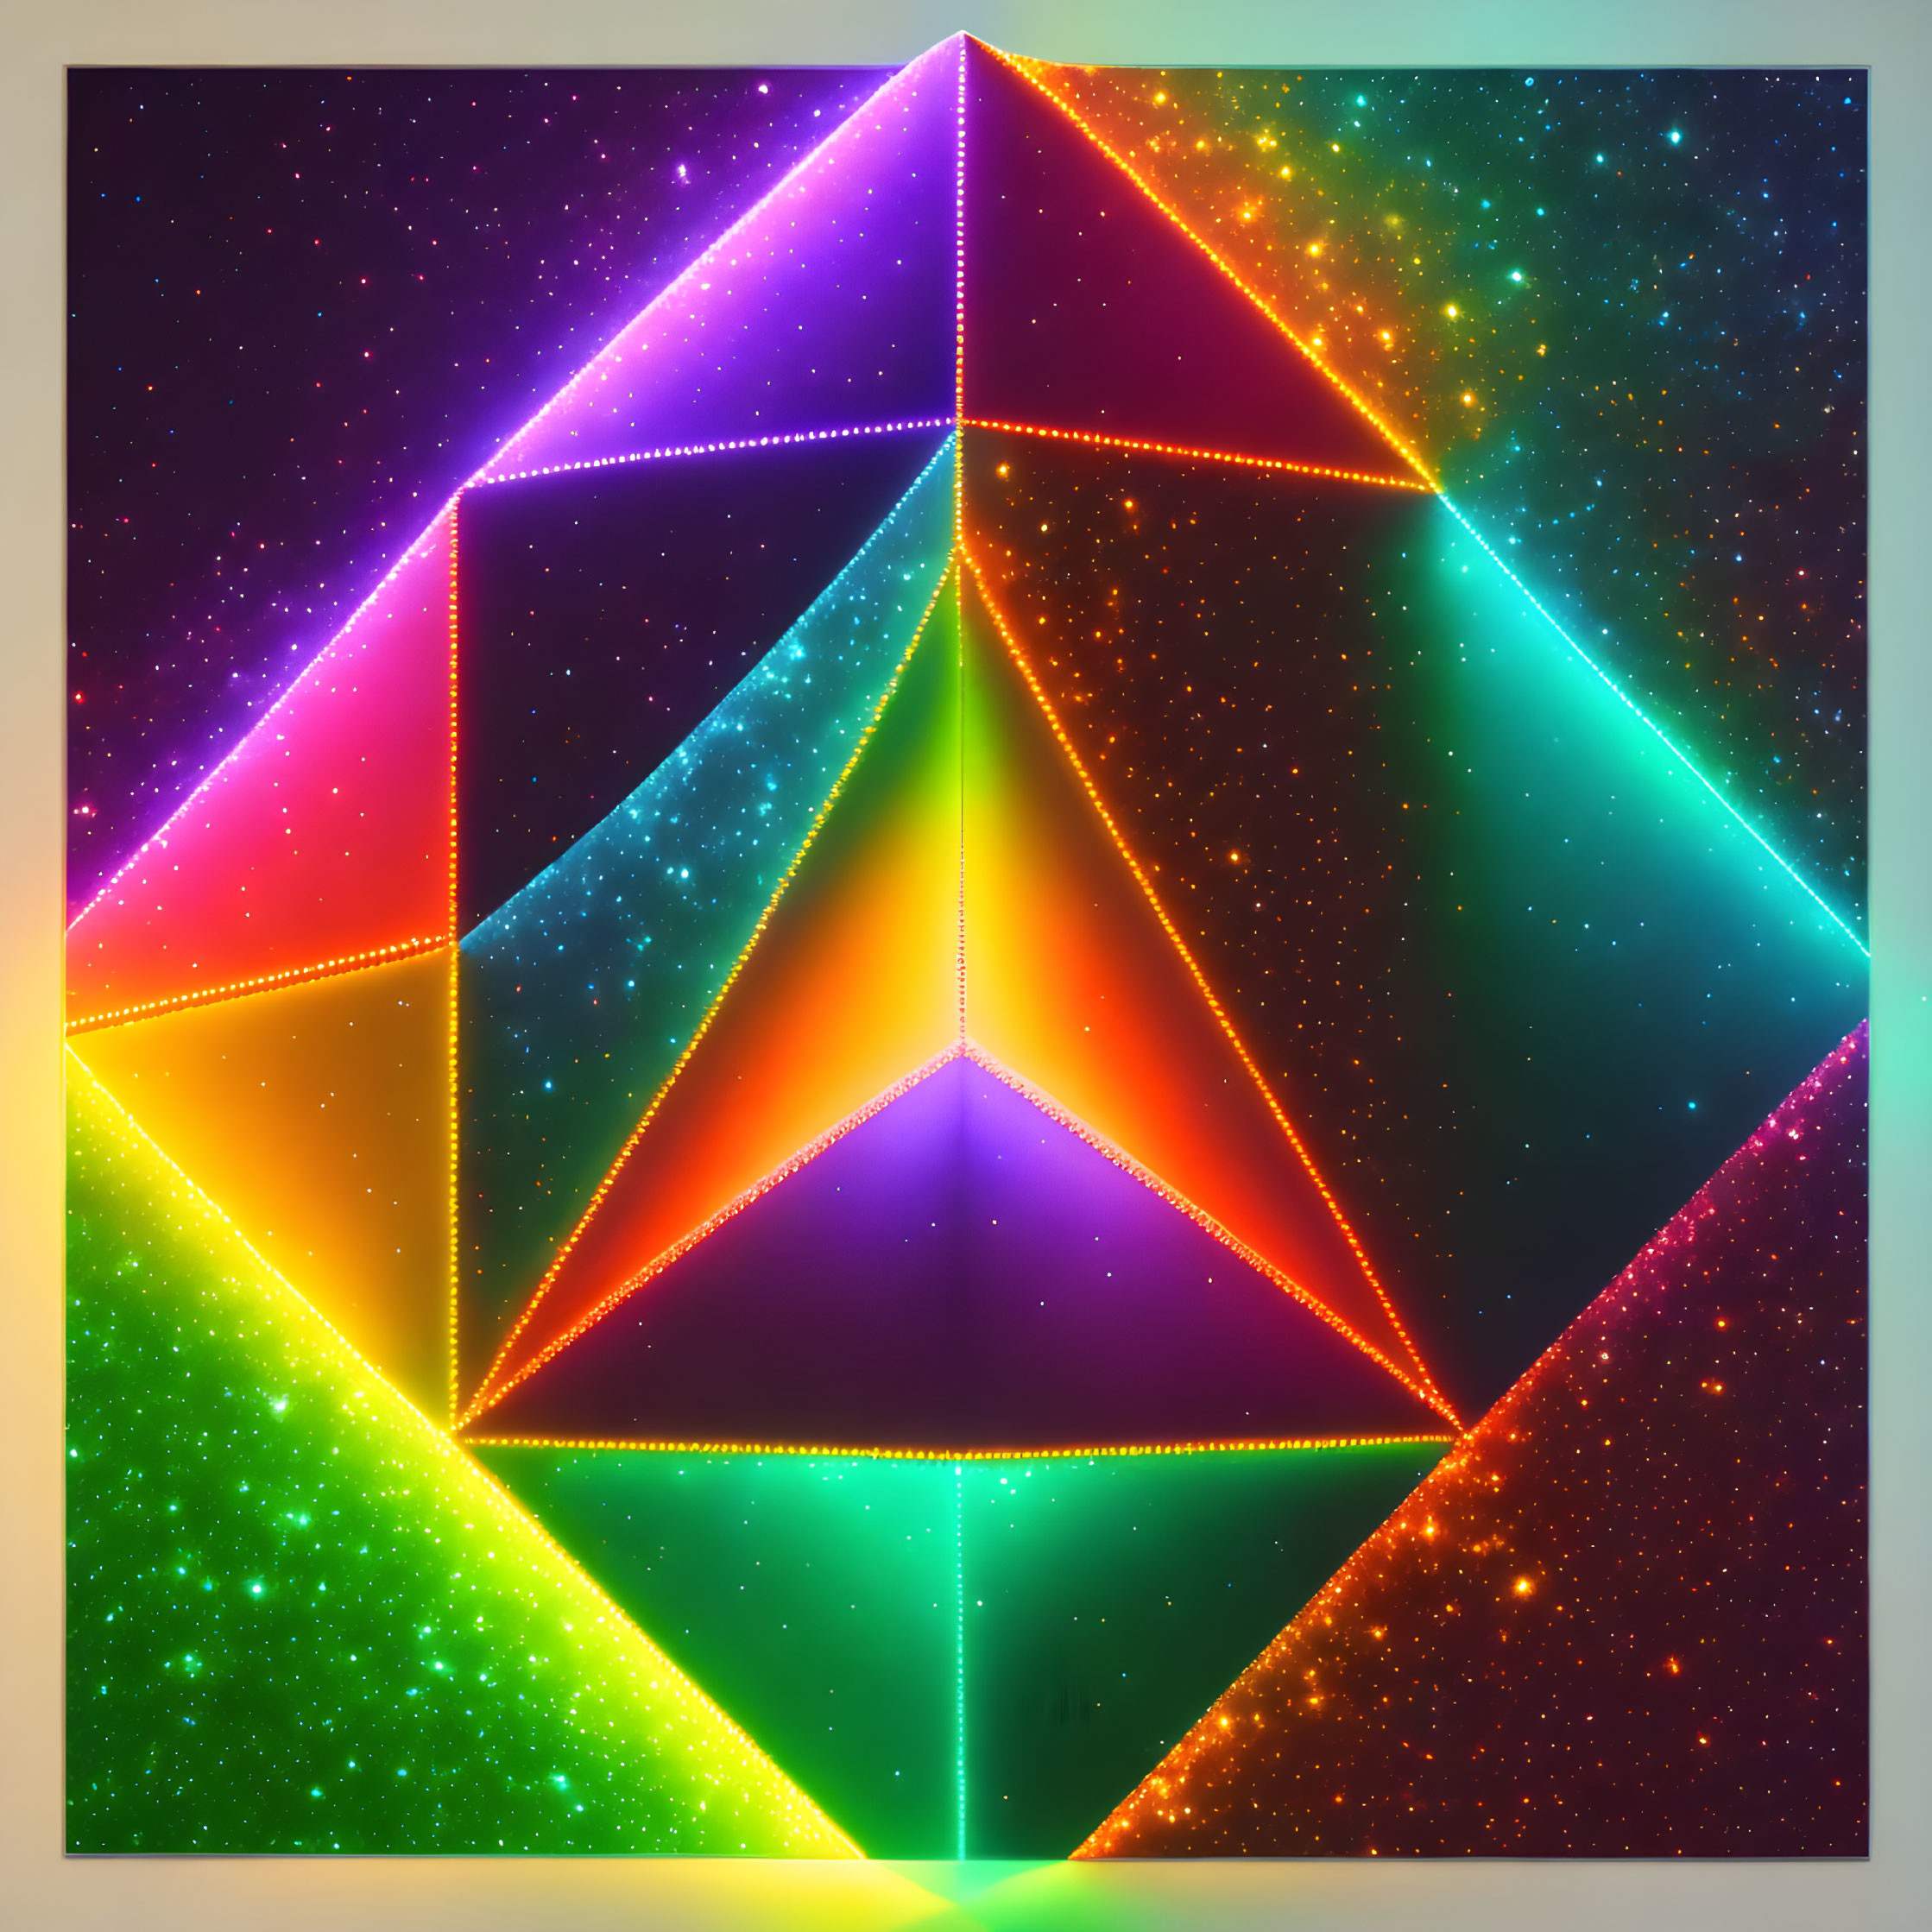 Colorful Neon Tetrahedron in Space Background Artwork